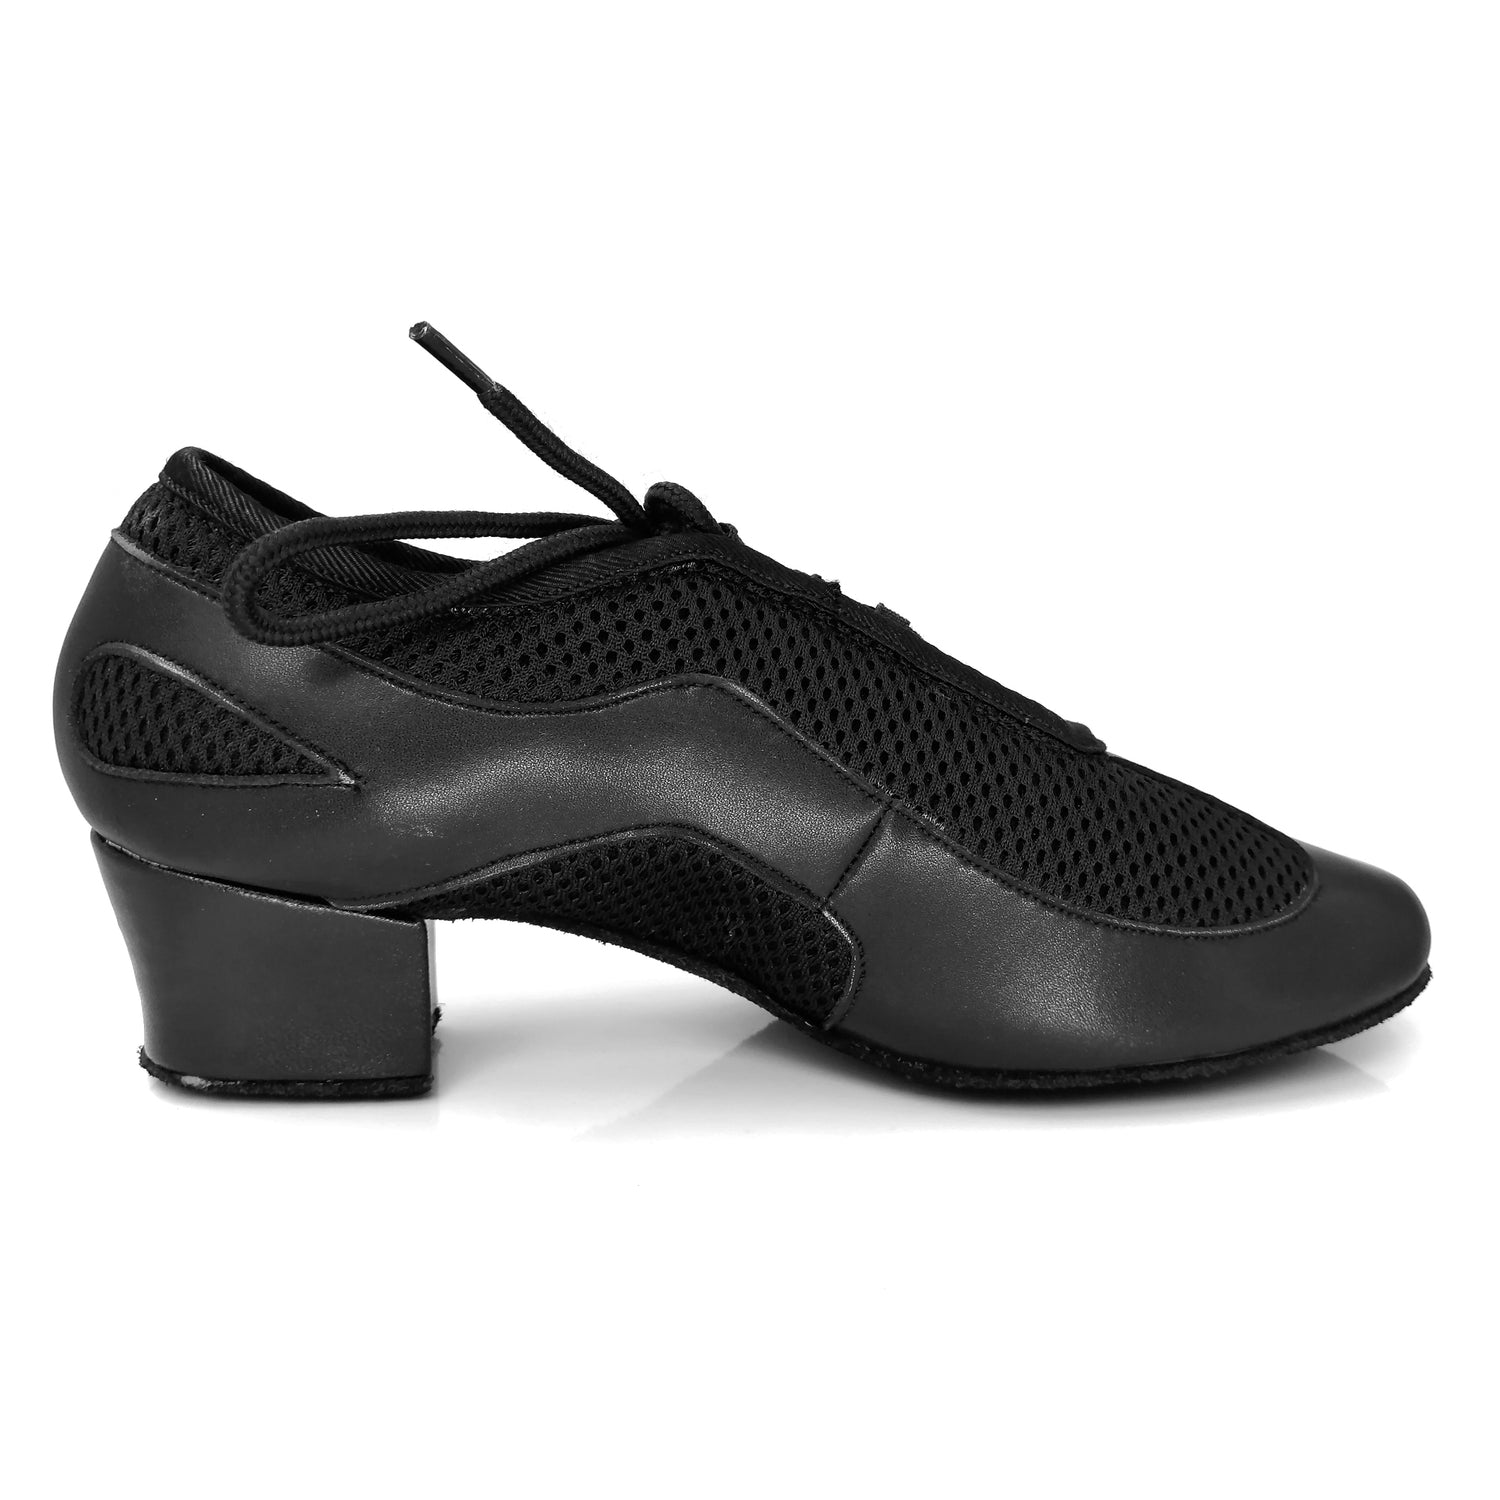 Women Ballroom Dancing Shoes with Suede Sole Lace-up Closed-toe for Tango Latin Practice PD5006A0